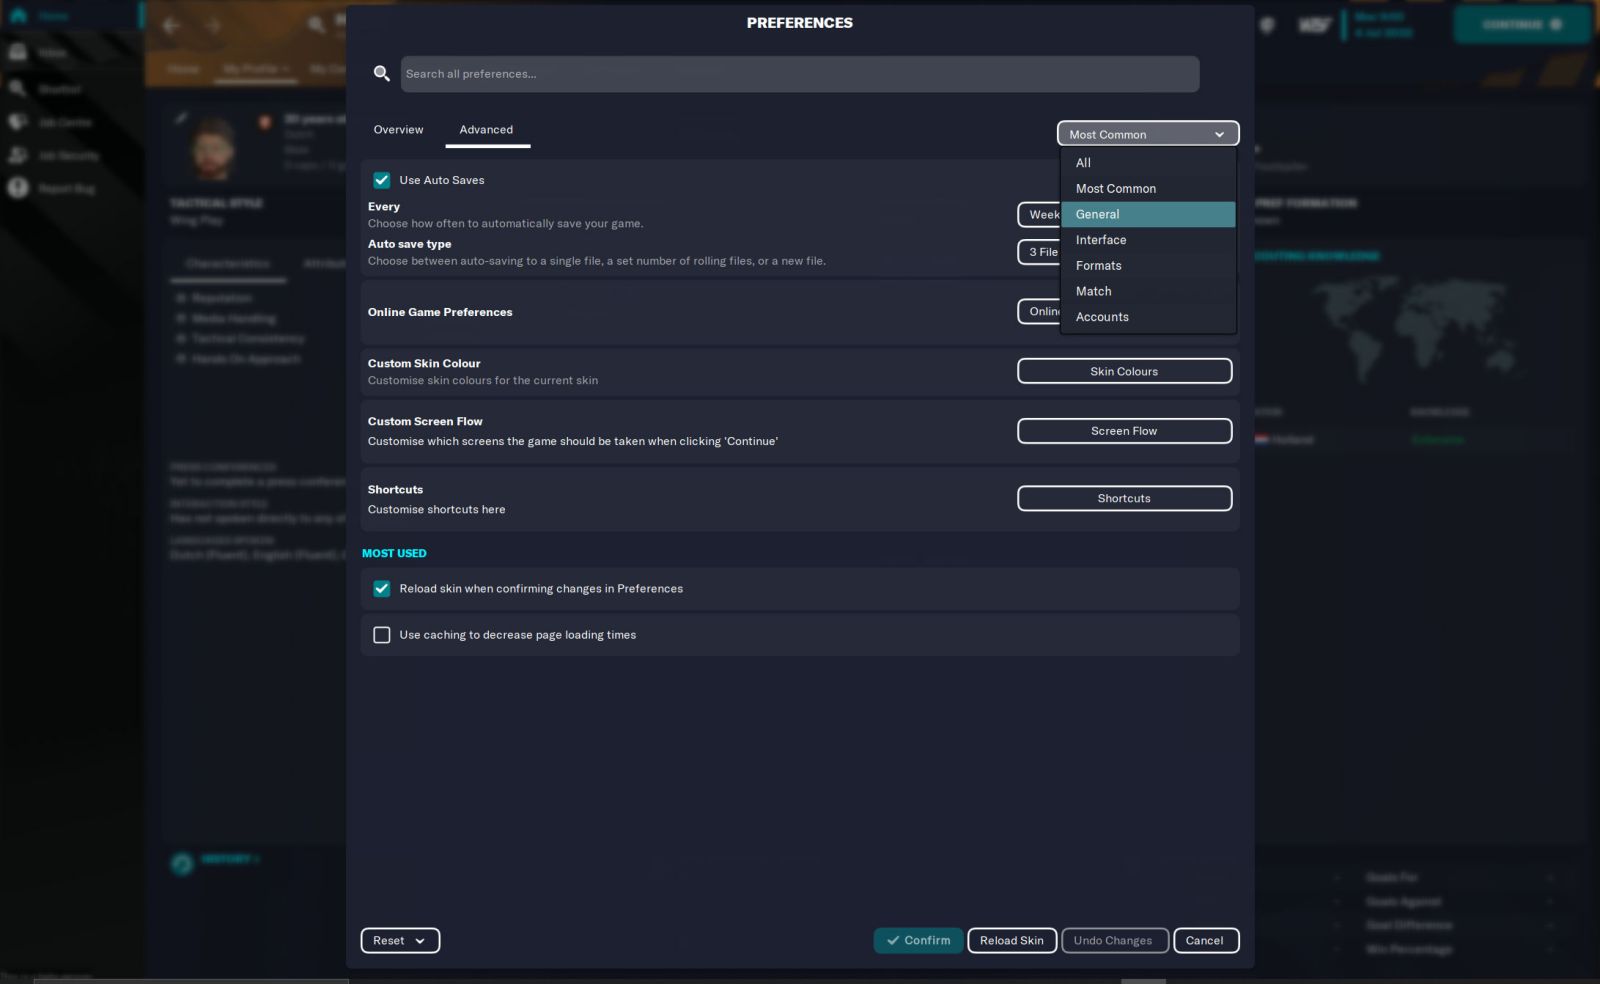 How to add leagues to FM through Steam - FMInside Football Manager Community